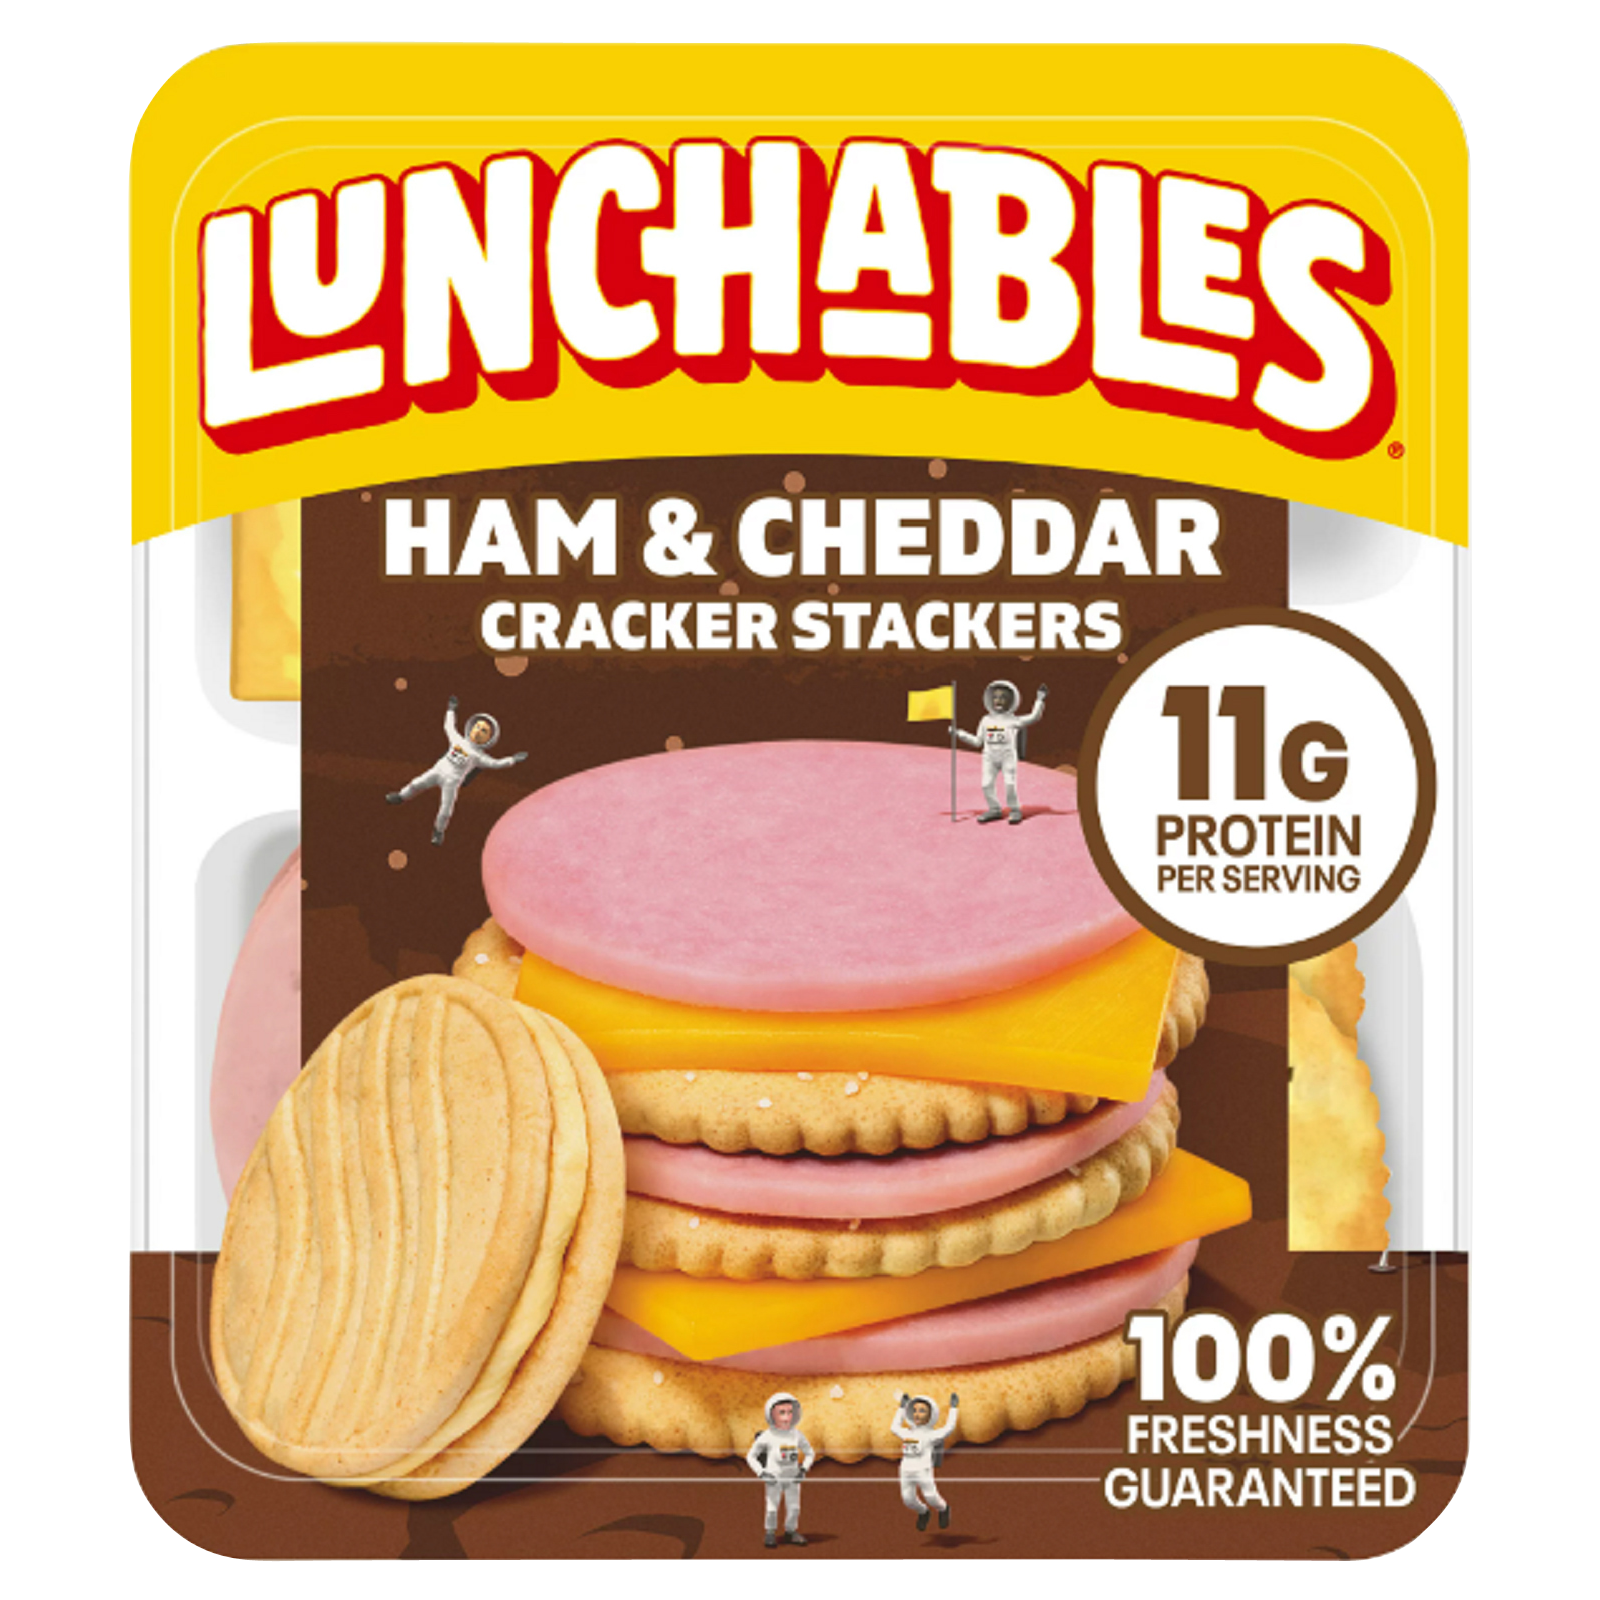 Lunchables Ham & Cheddar Cheese Cracker Stackers Vanilla Crème Cookies - 3.5oz